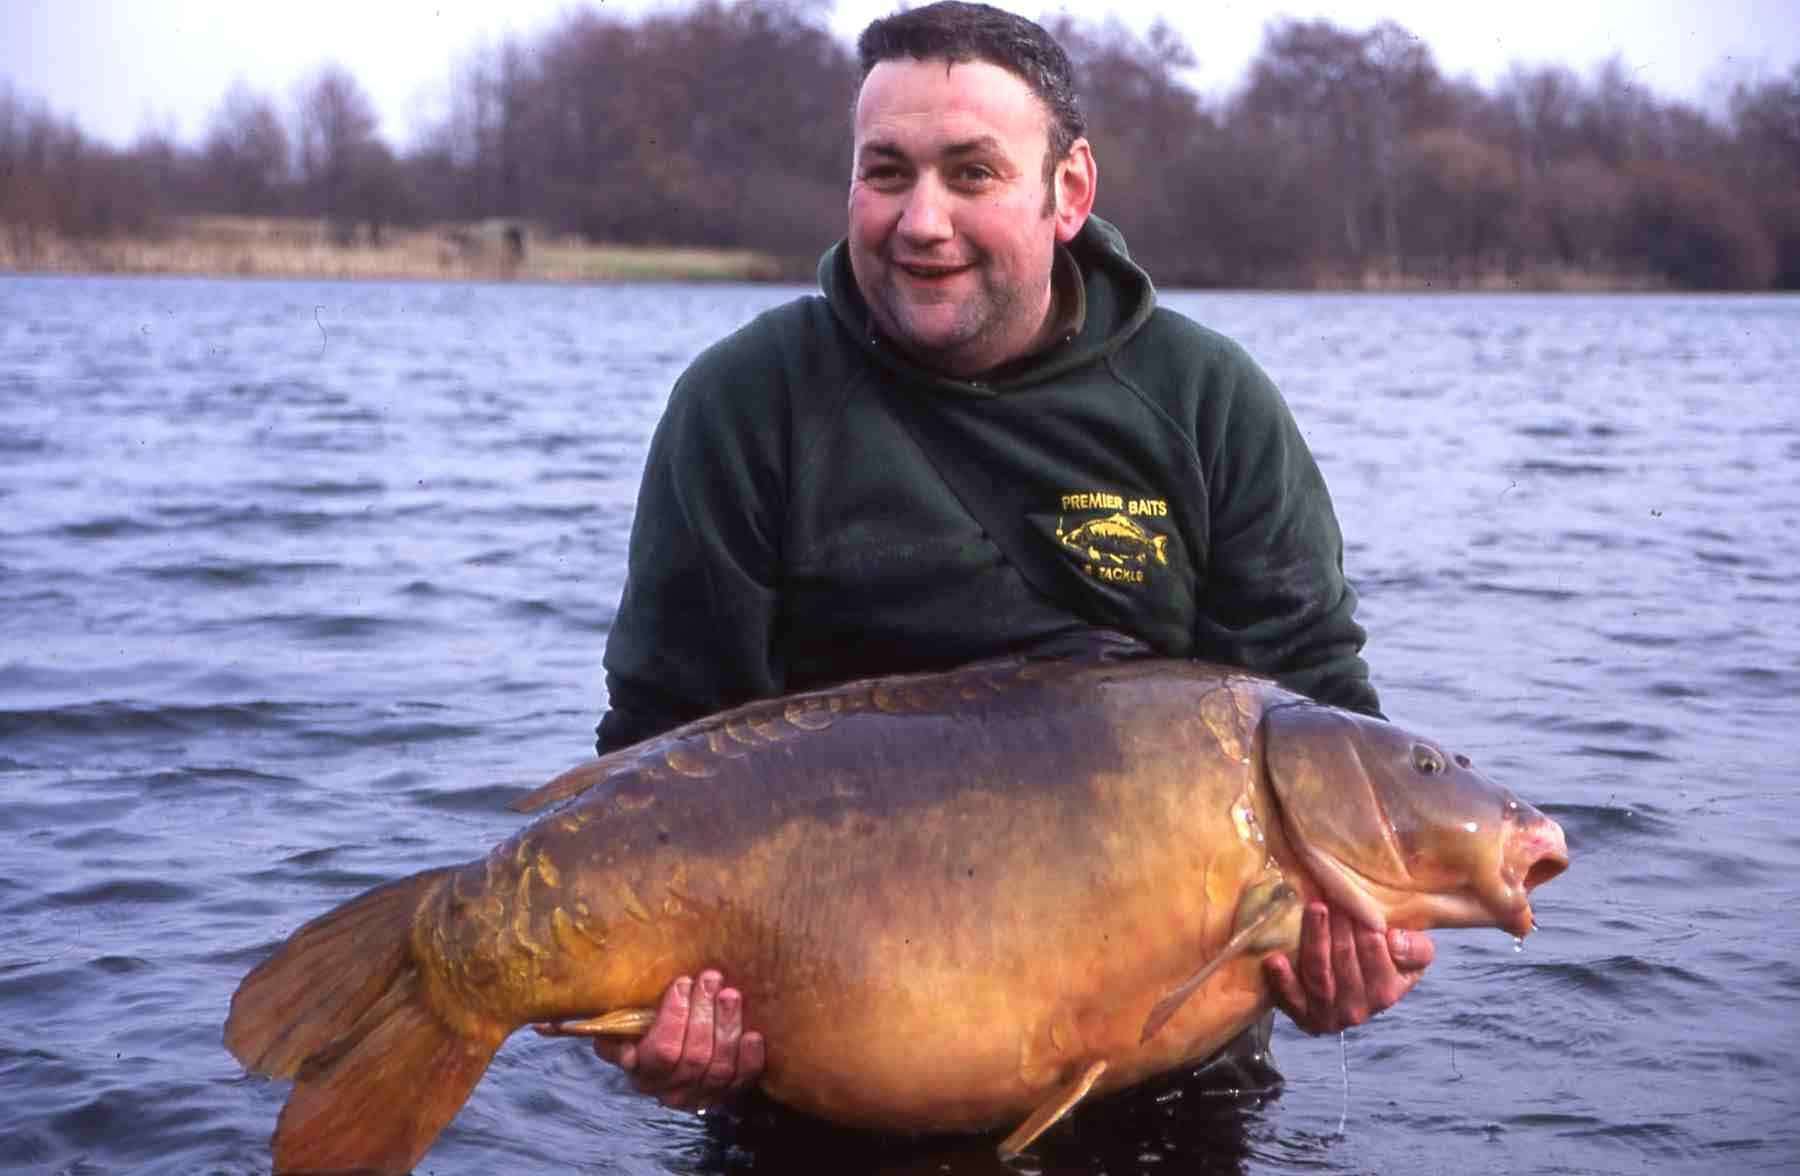 Jon Pack, from Ashford, was one of the lucky few to catch Britain's largest carp. Picture: Niamh Arnett/Mid Kent Water